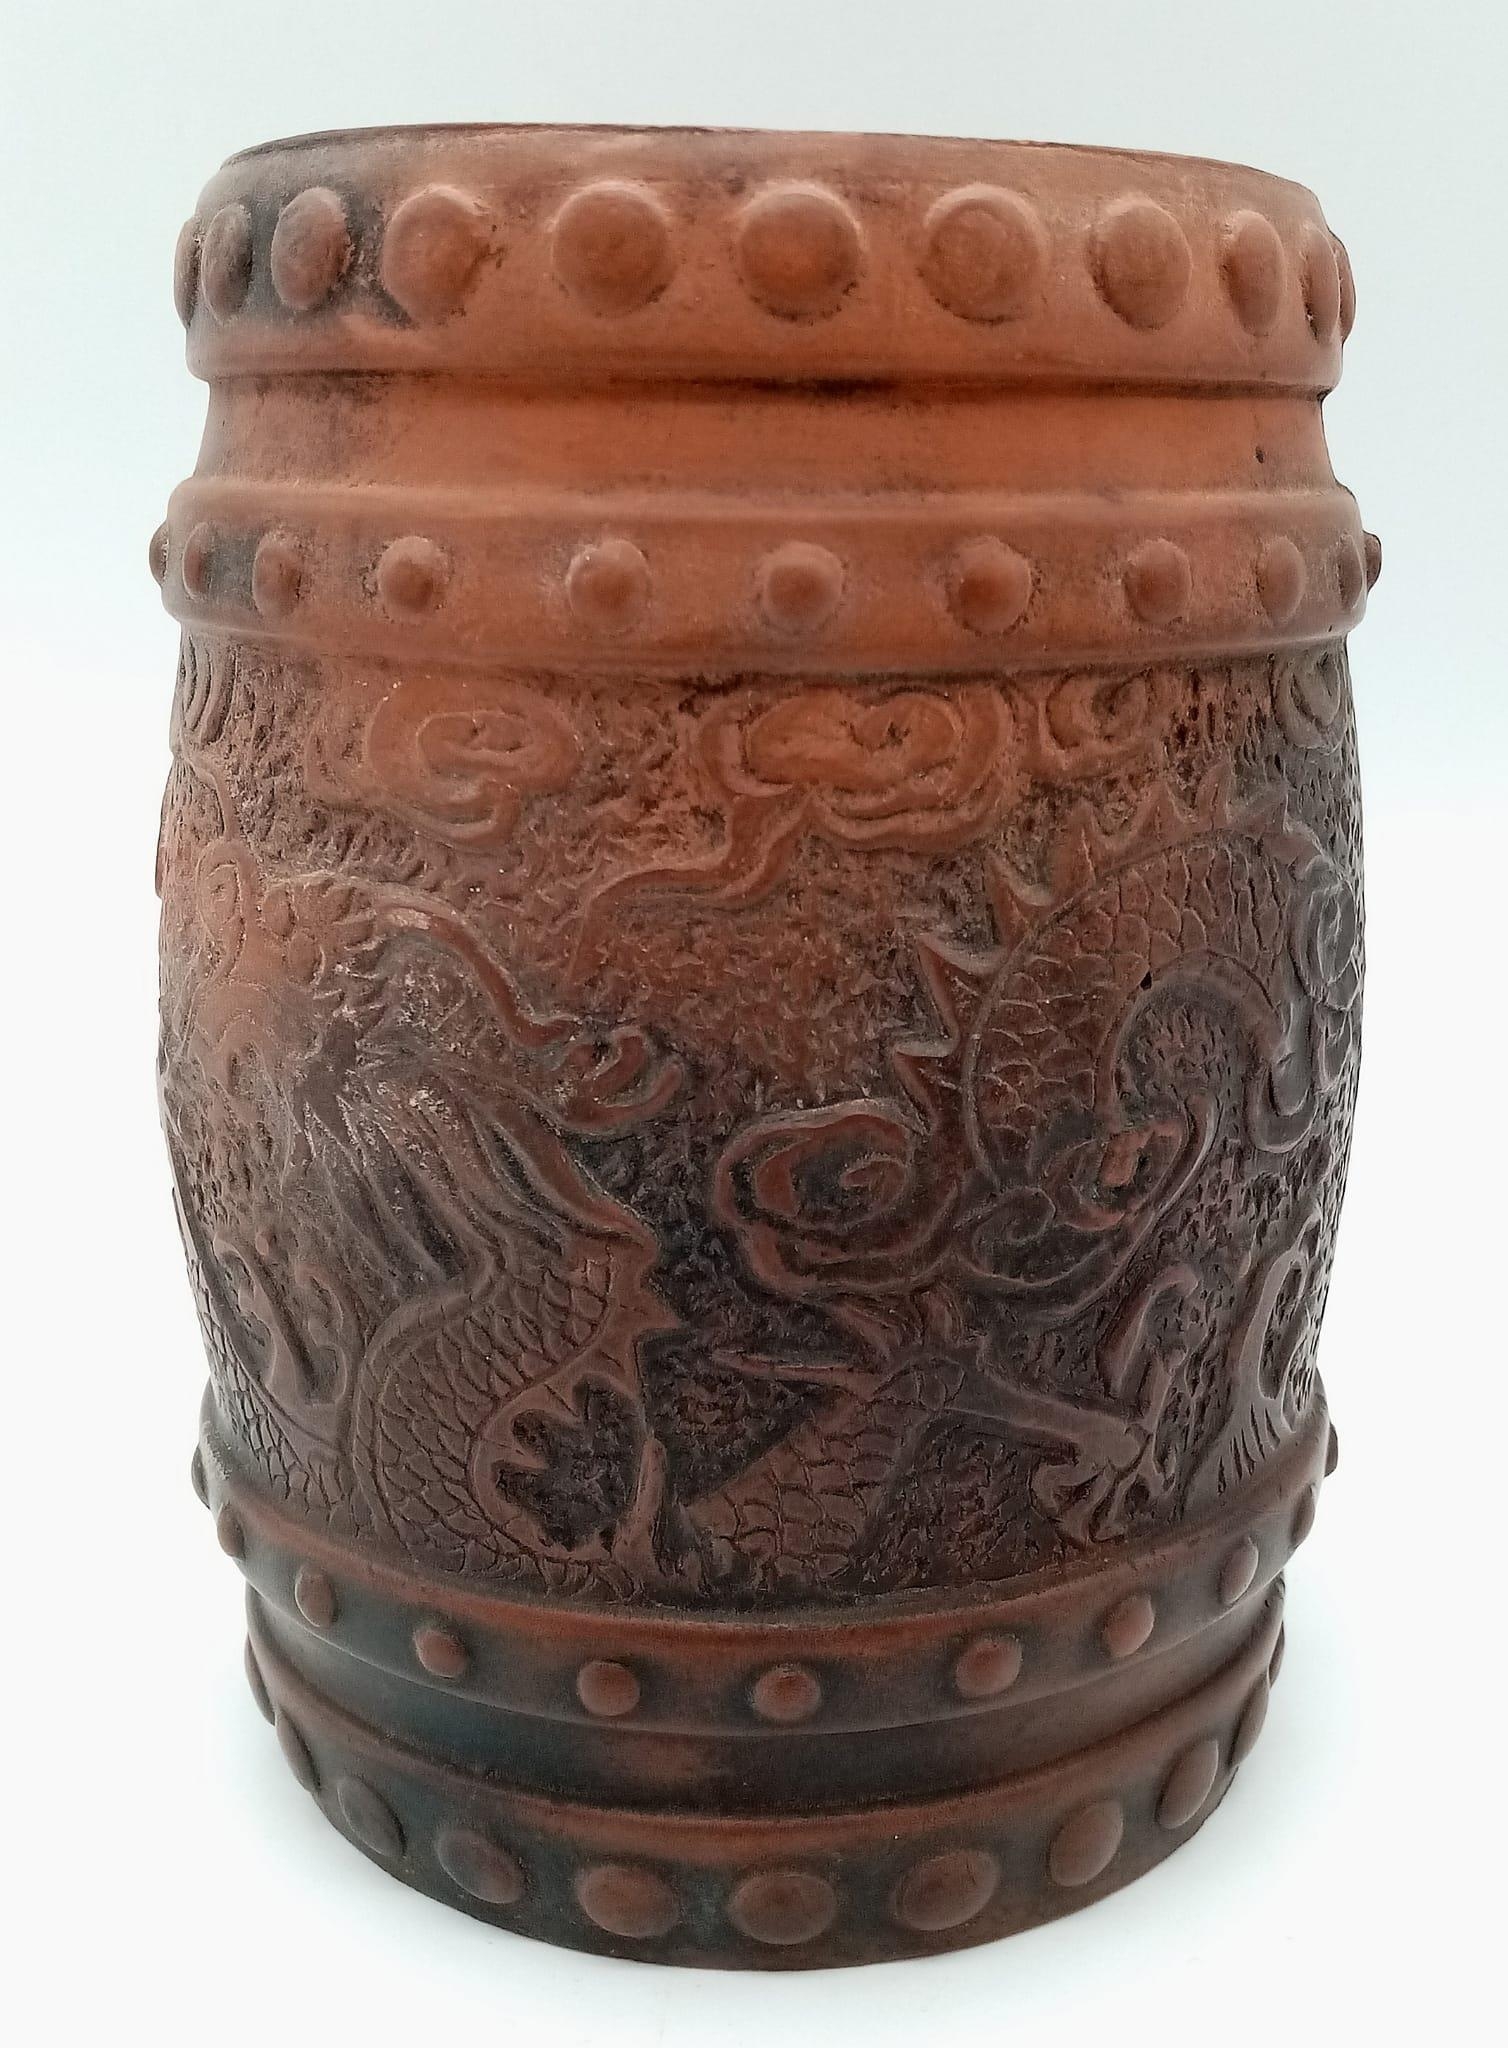 Antique Chinese Yixing Zisha Tea Jar. Beautifully made and inscribed with ancient dragons amongst